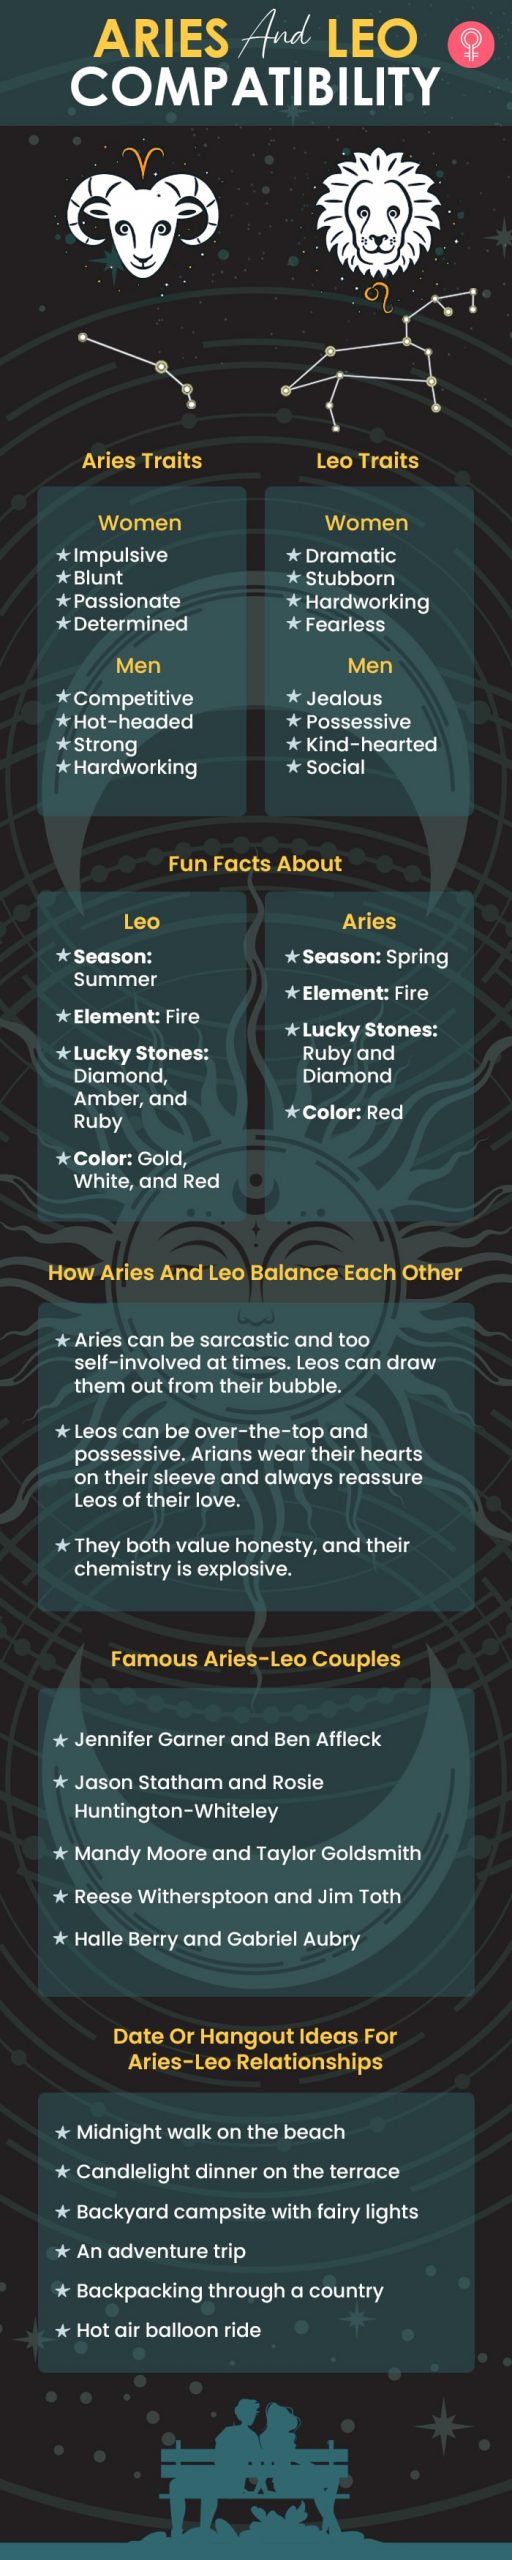 aries and leo compatibility (infographic)style=